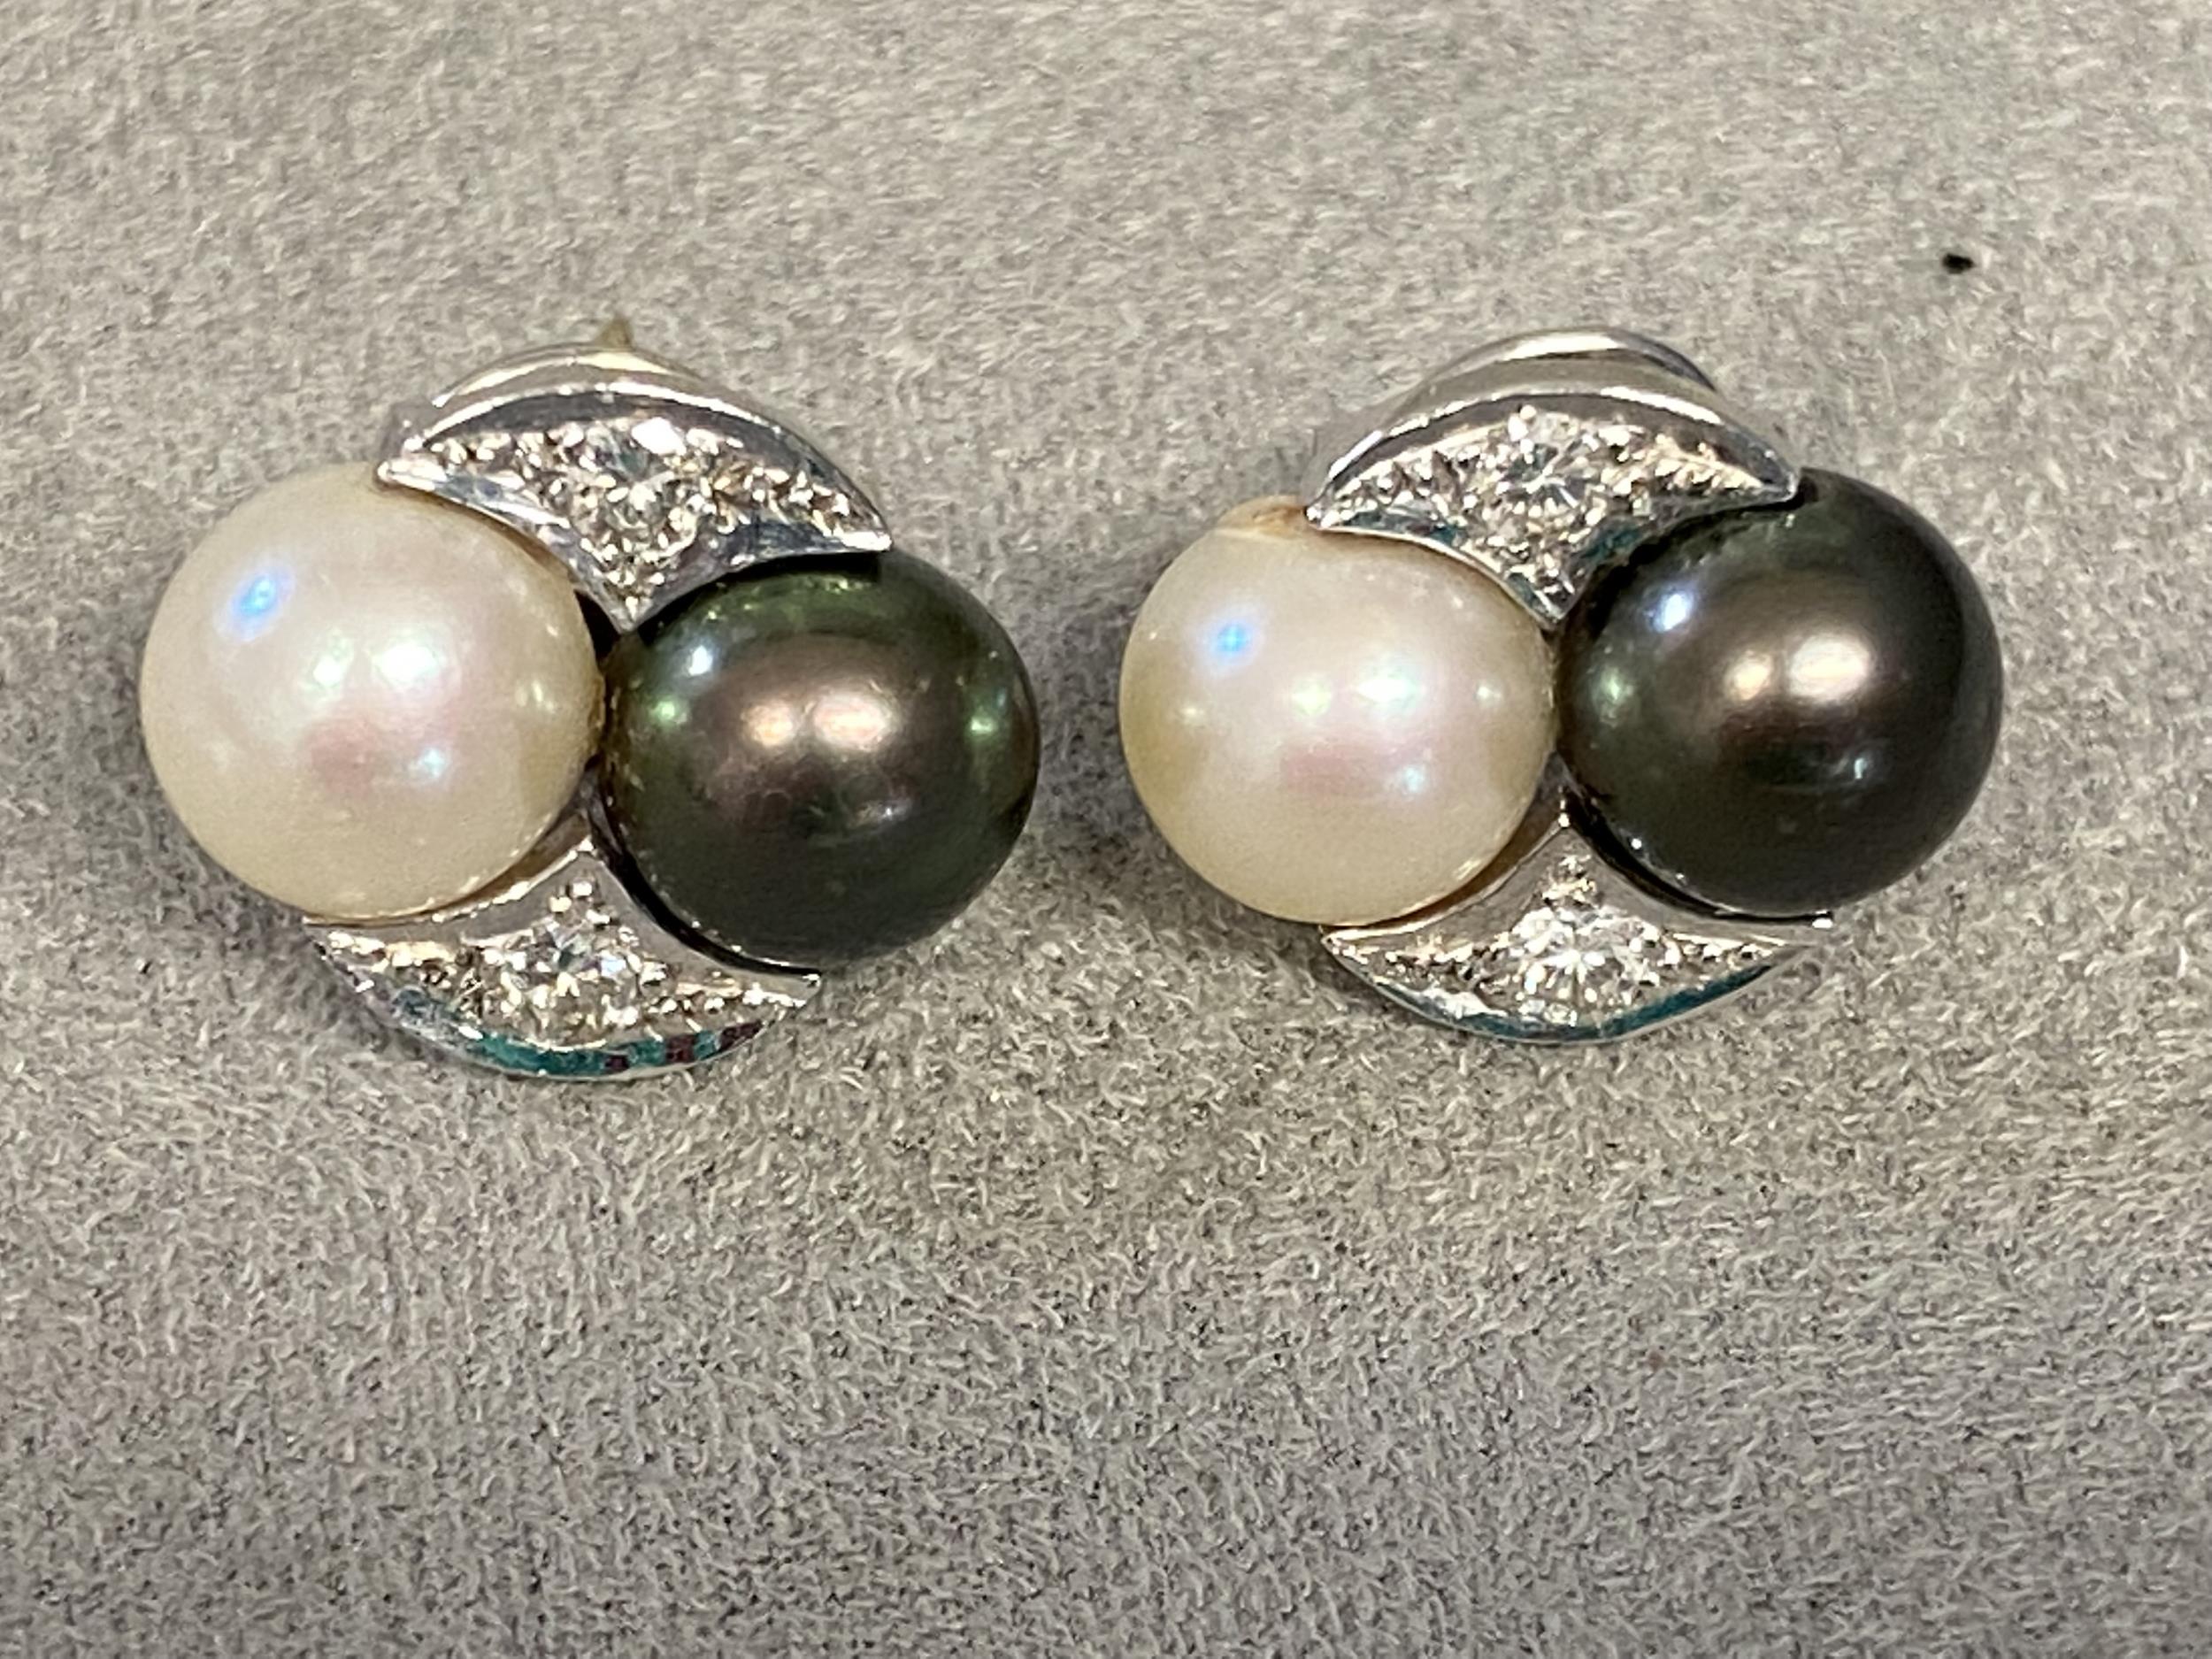 Pair of 18ct white gold and platinum Tahitian white and black pearl ear studs, with diamond accents, - Image 2 of 3